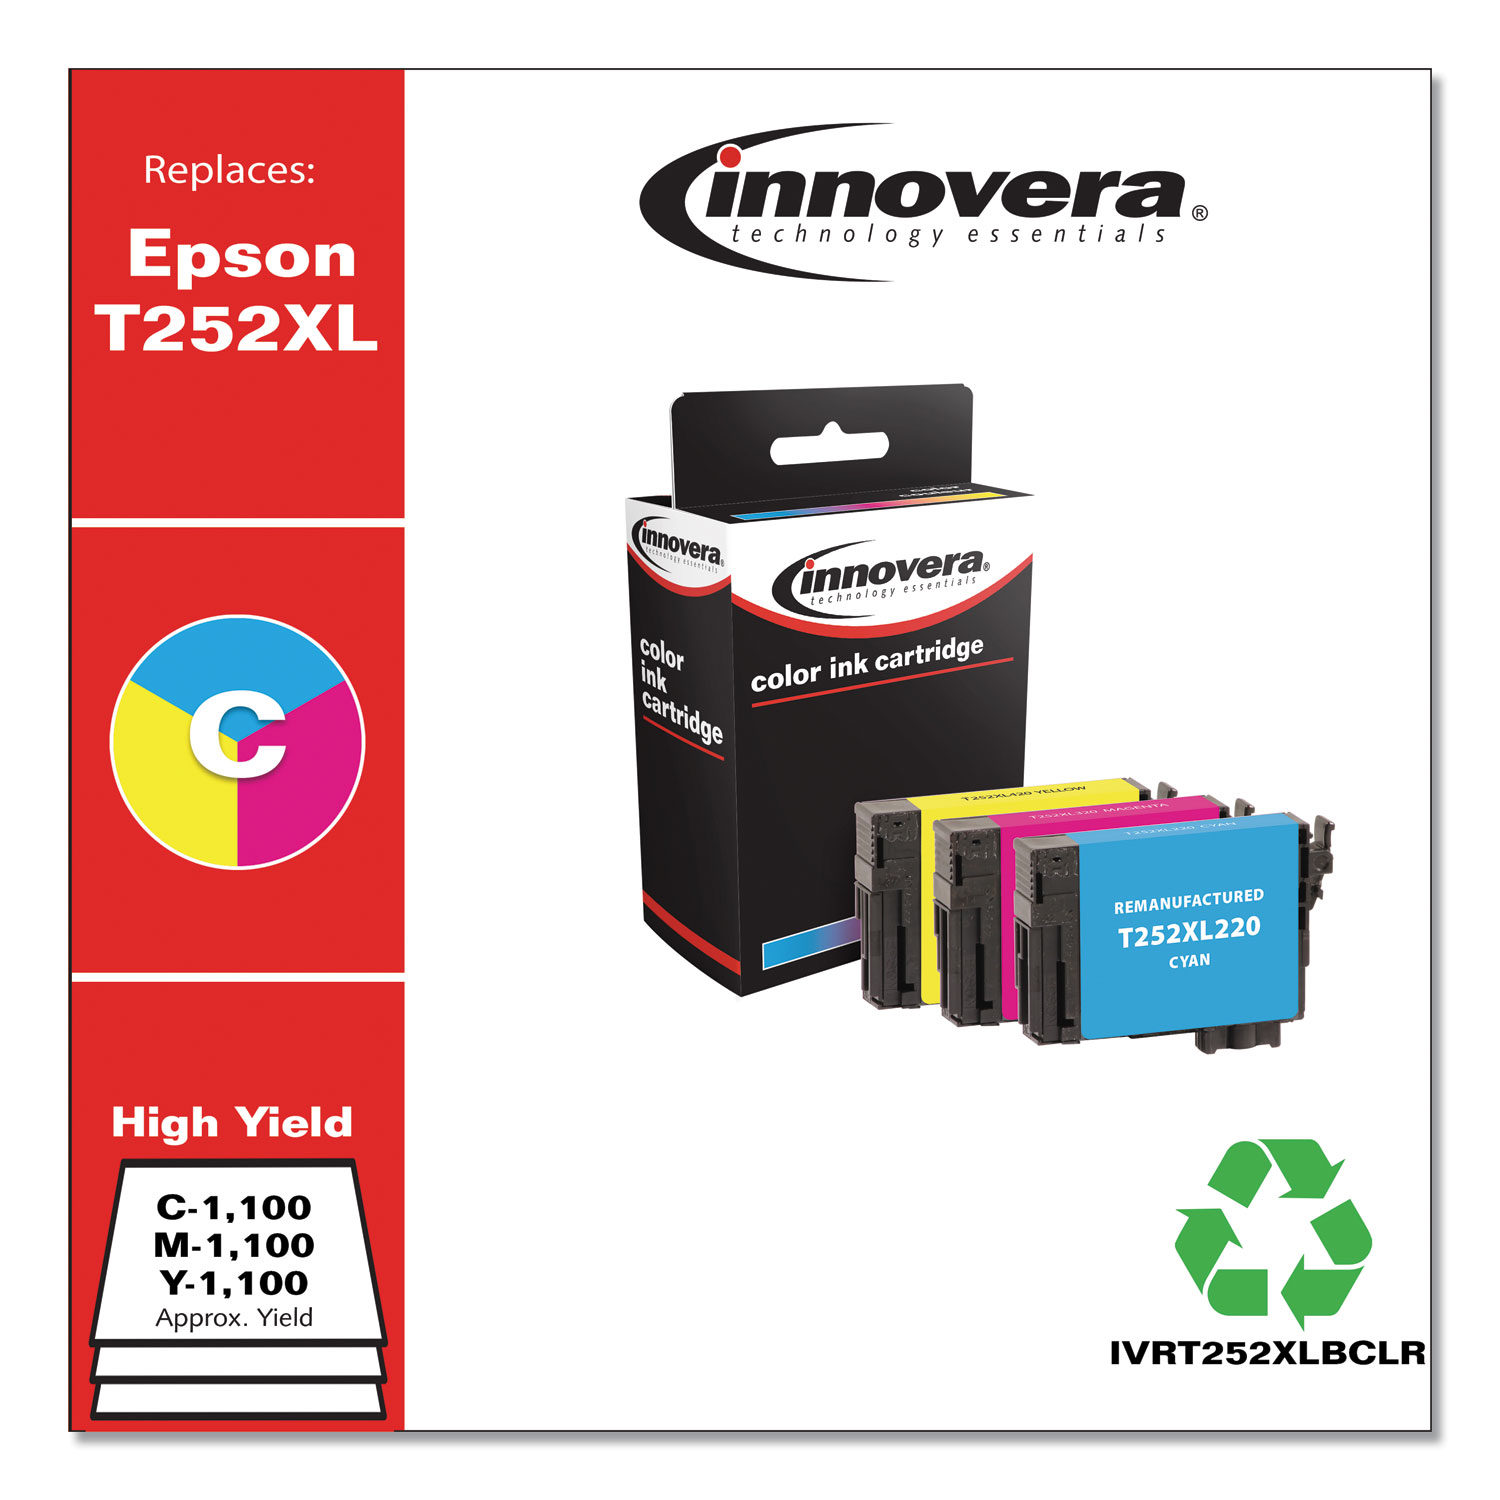  Innovera IVRT252XLBCLR Remanufactured Cyan/Magenta/Yellow High-Yield Ink, Replacement for Epson T252XL (T252XL220/320/420) 1,100 Page-Yield (IVRT252XLBCLR) 